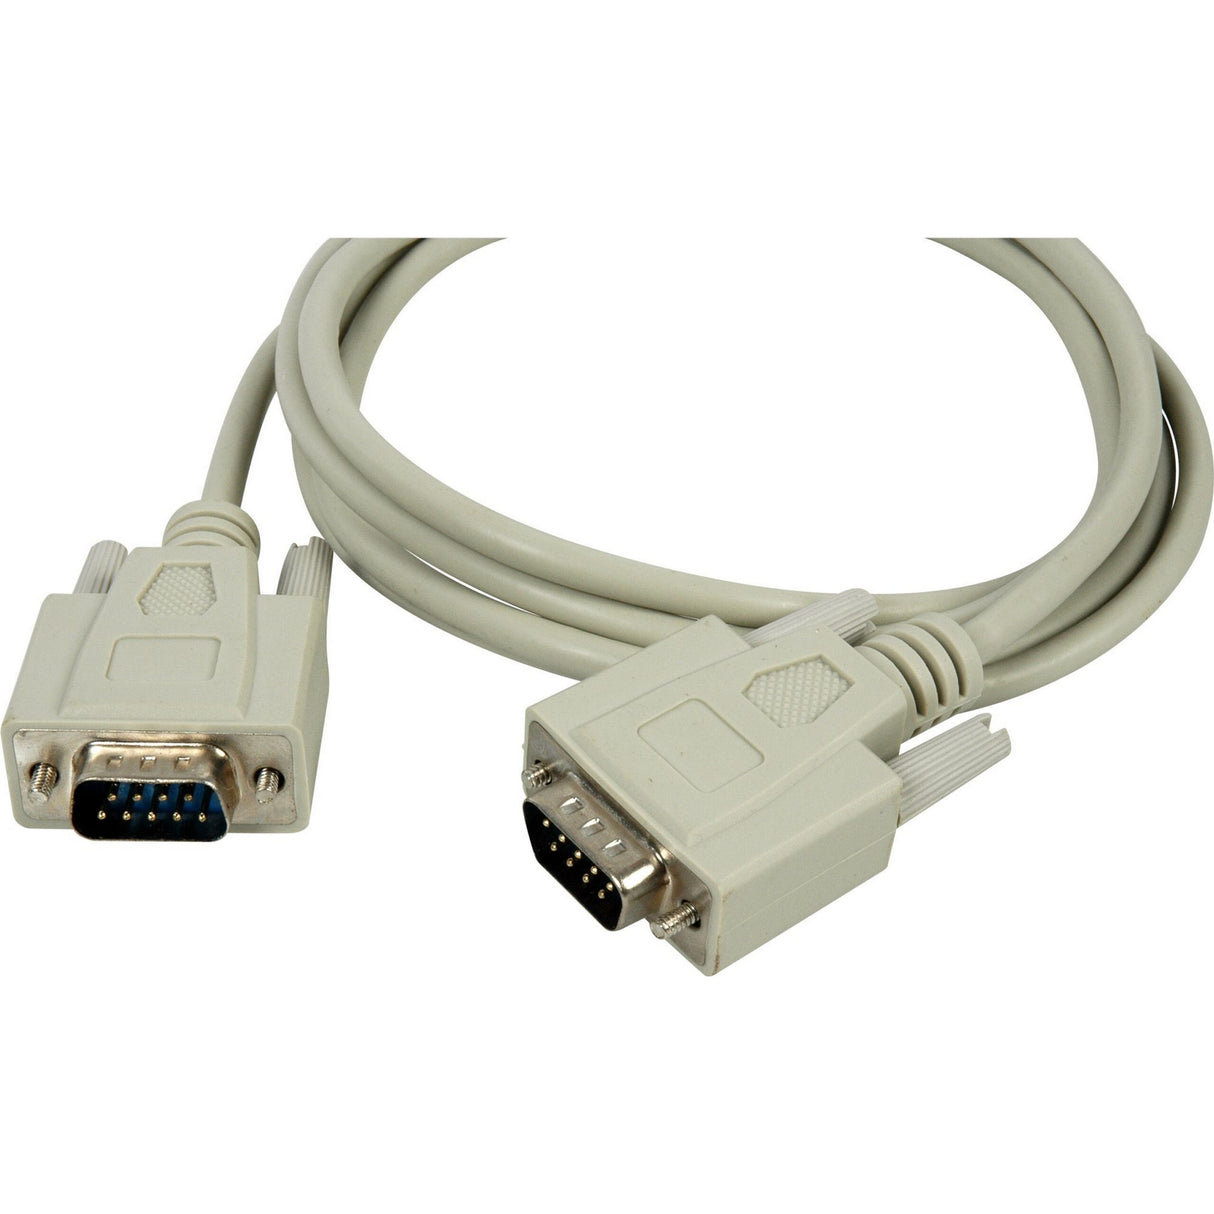 Connectronics DB-9 Serial Male to Male Molded Cable, 10 Foot Beige